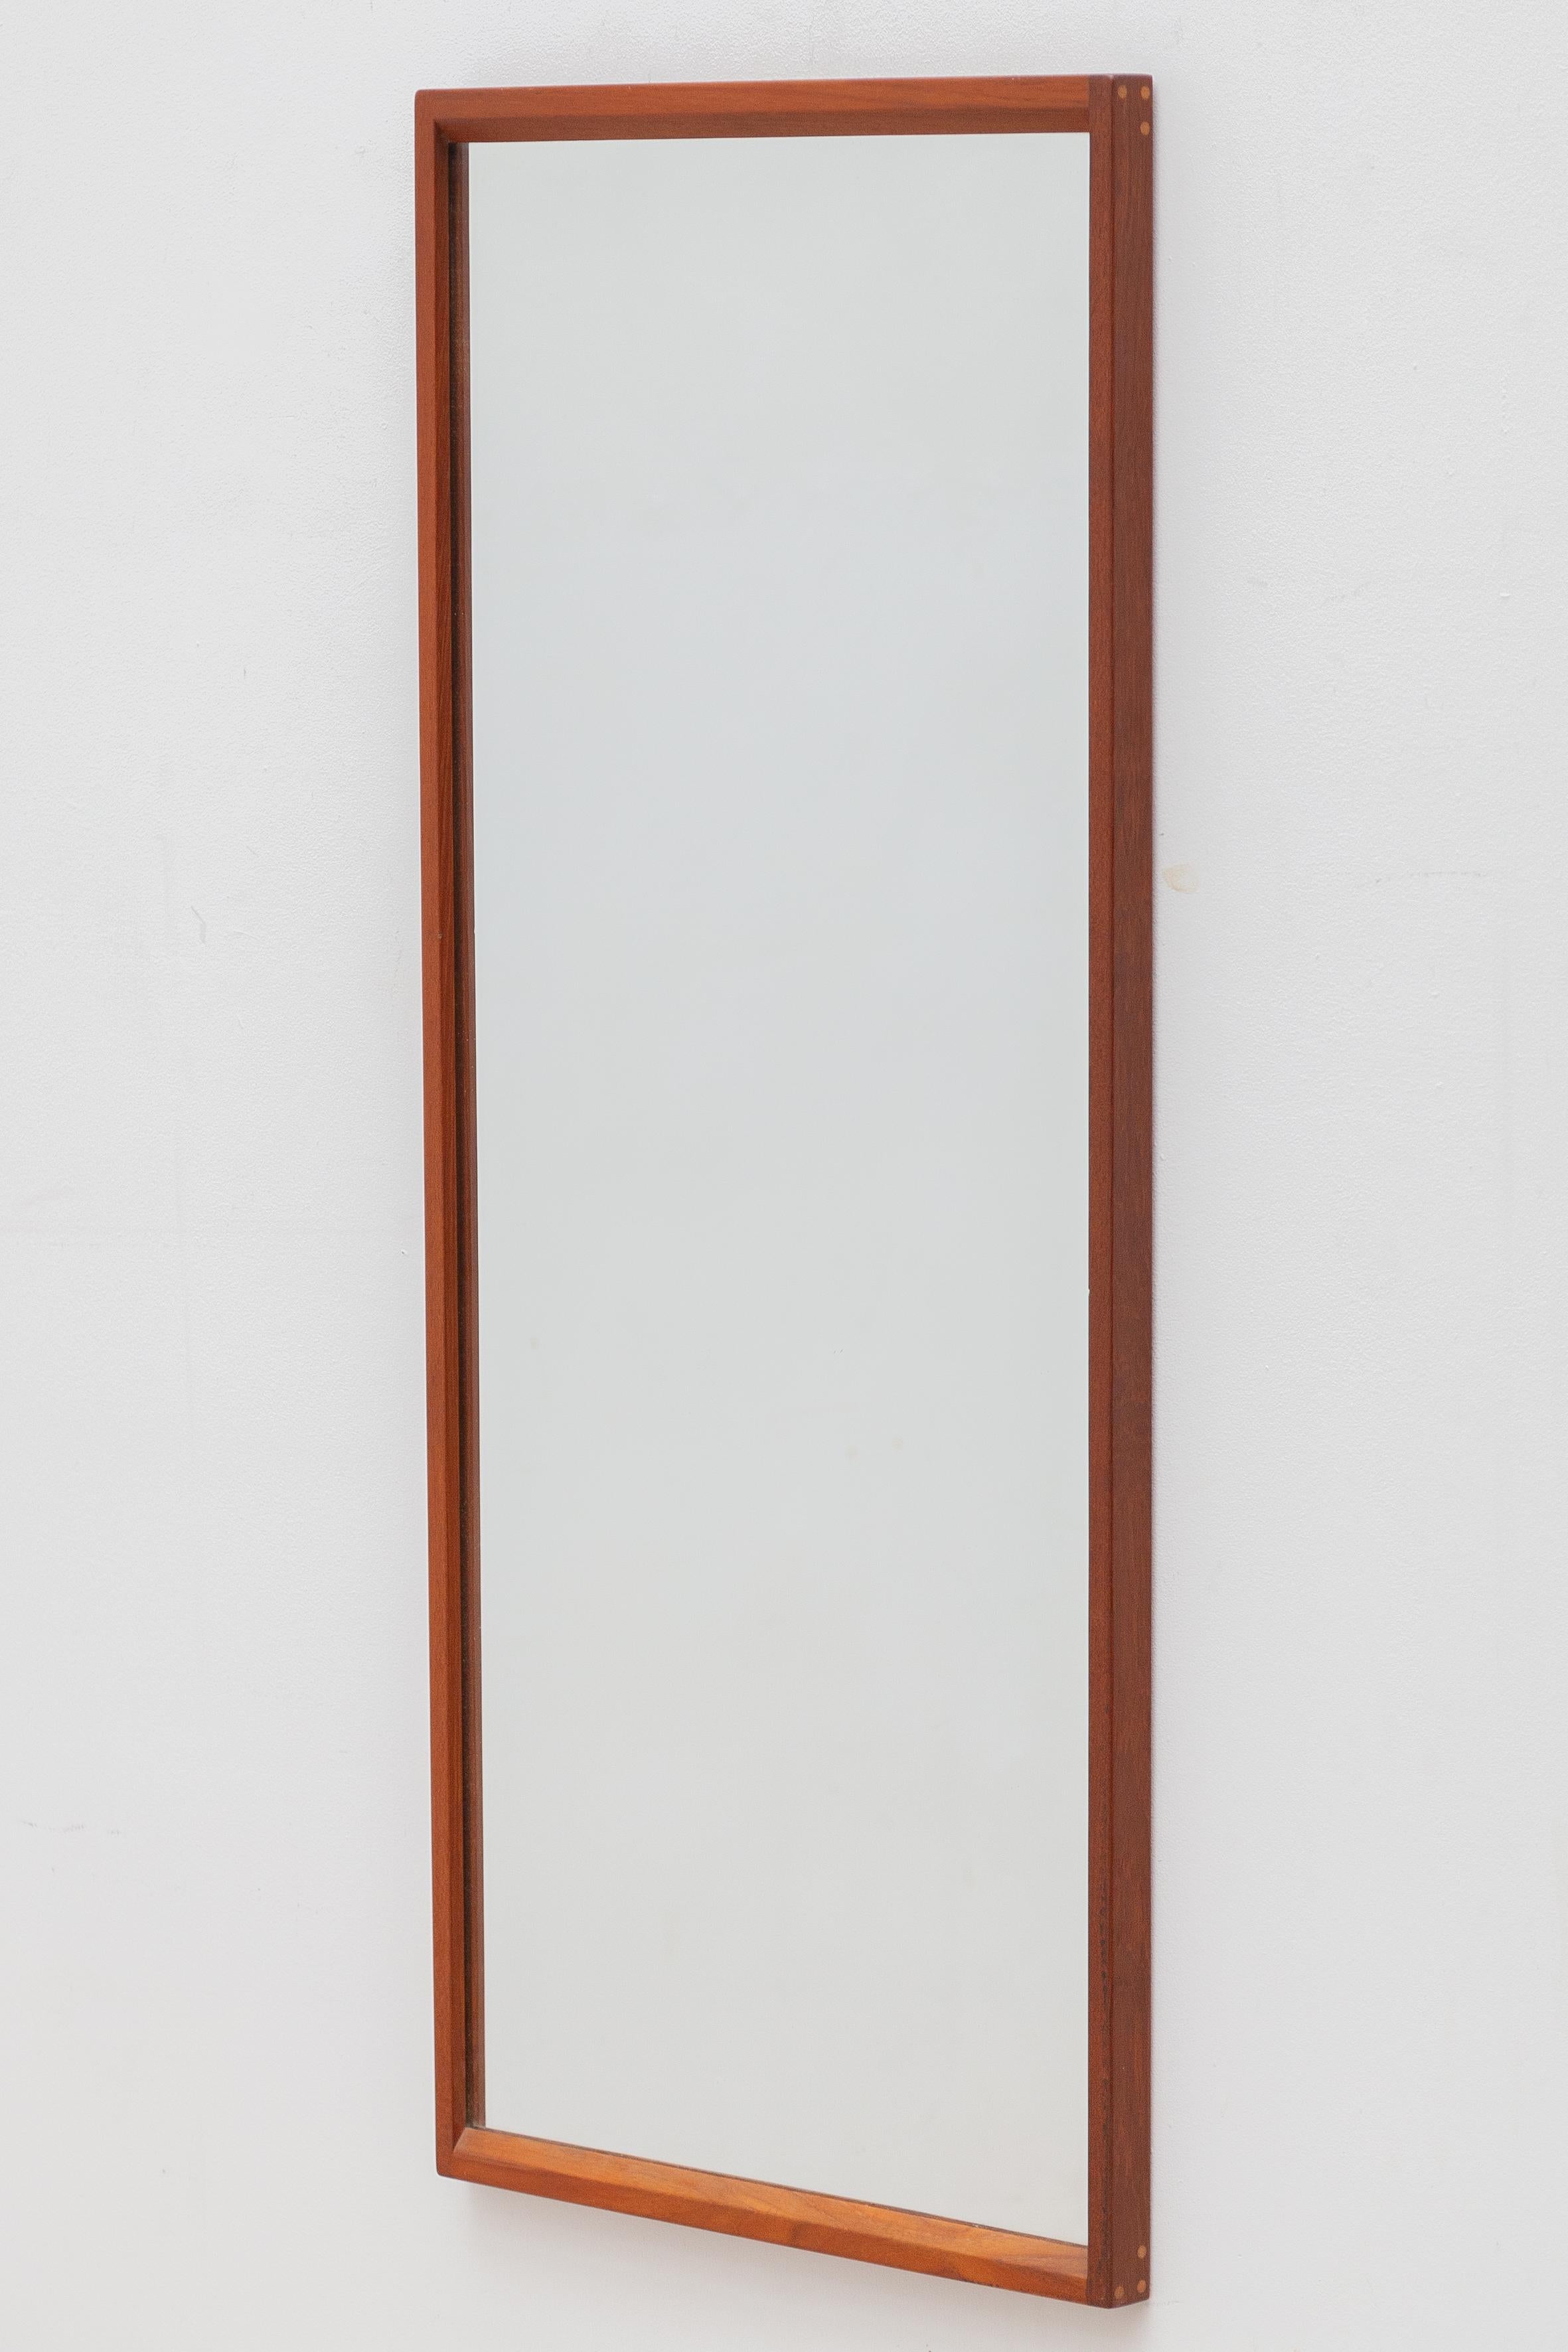 1960s wall mirror designed and manufactured by Aksel Kjersgaard in Danish municipality of Odder. Very well crafted design, utilizing masterful joinery techniques and Kjersgaard's signature circular inset plugs that serve both the construction and